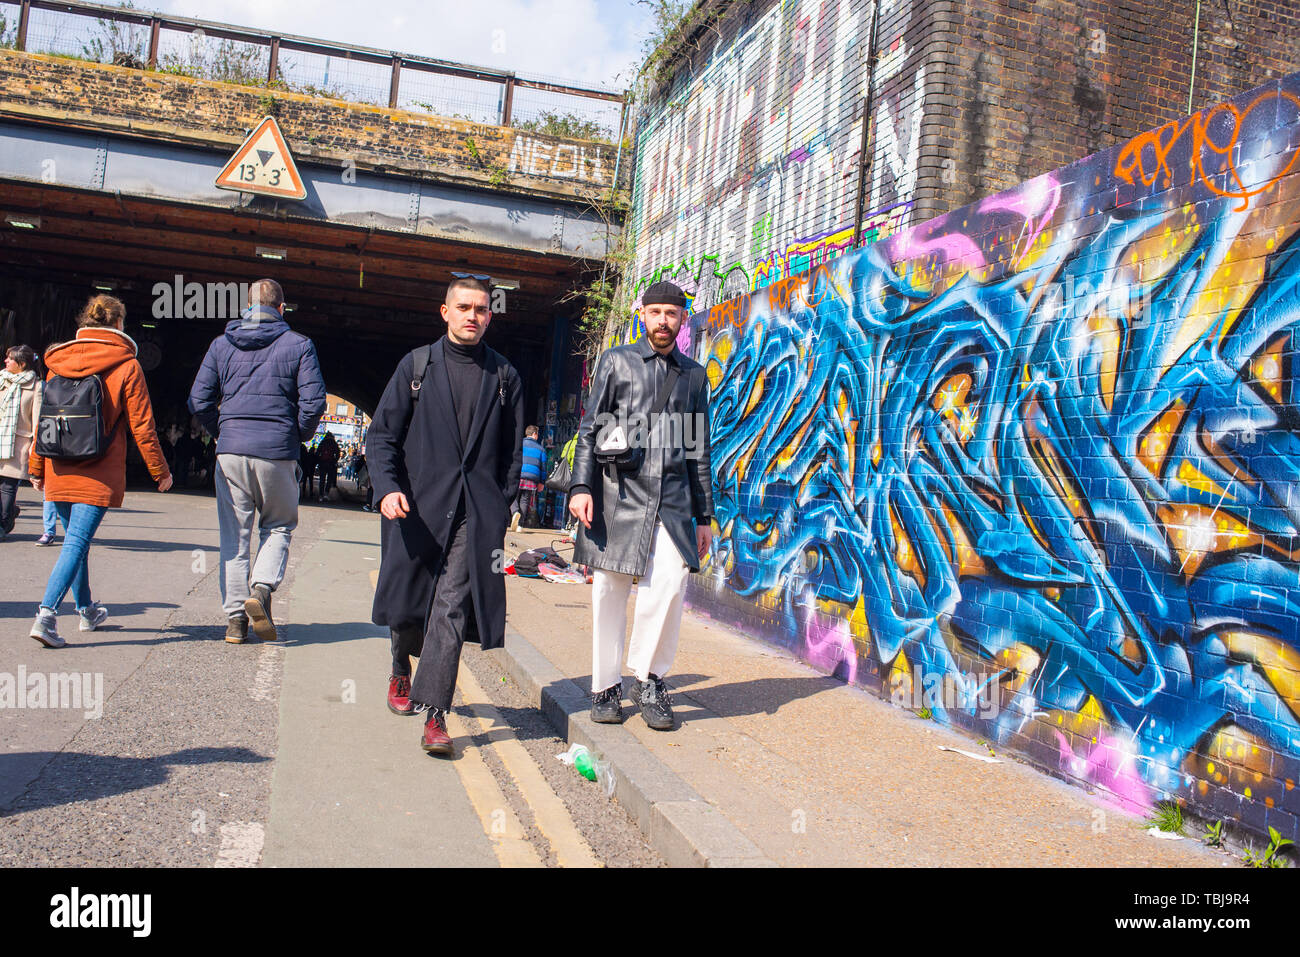 Shoreditch, London, England, UK - April 2019: Two hipster men walking in Wheler street next to a wall covered in graffiti mural street art in near Sho Stock Photo